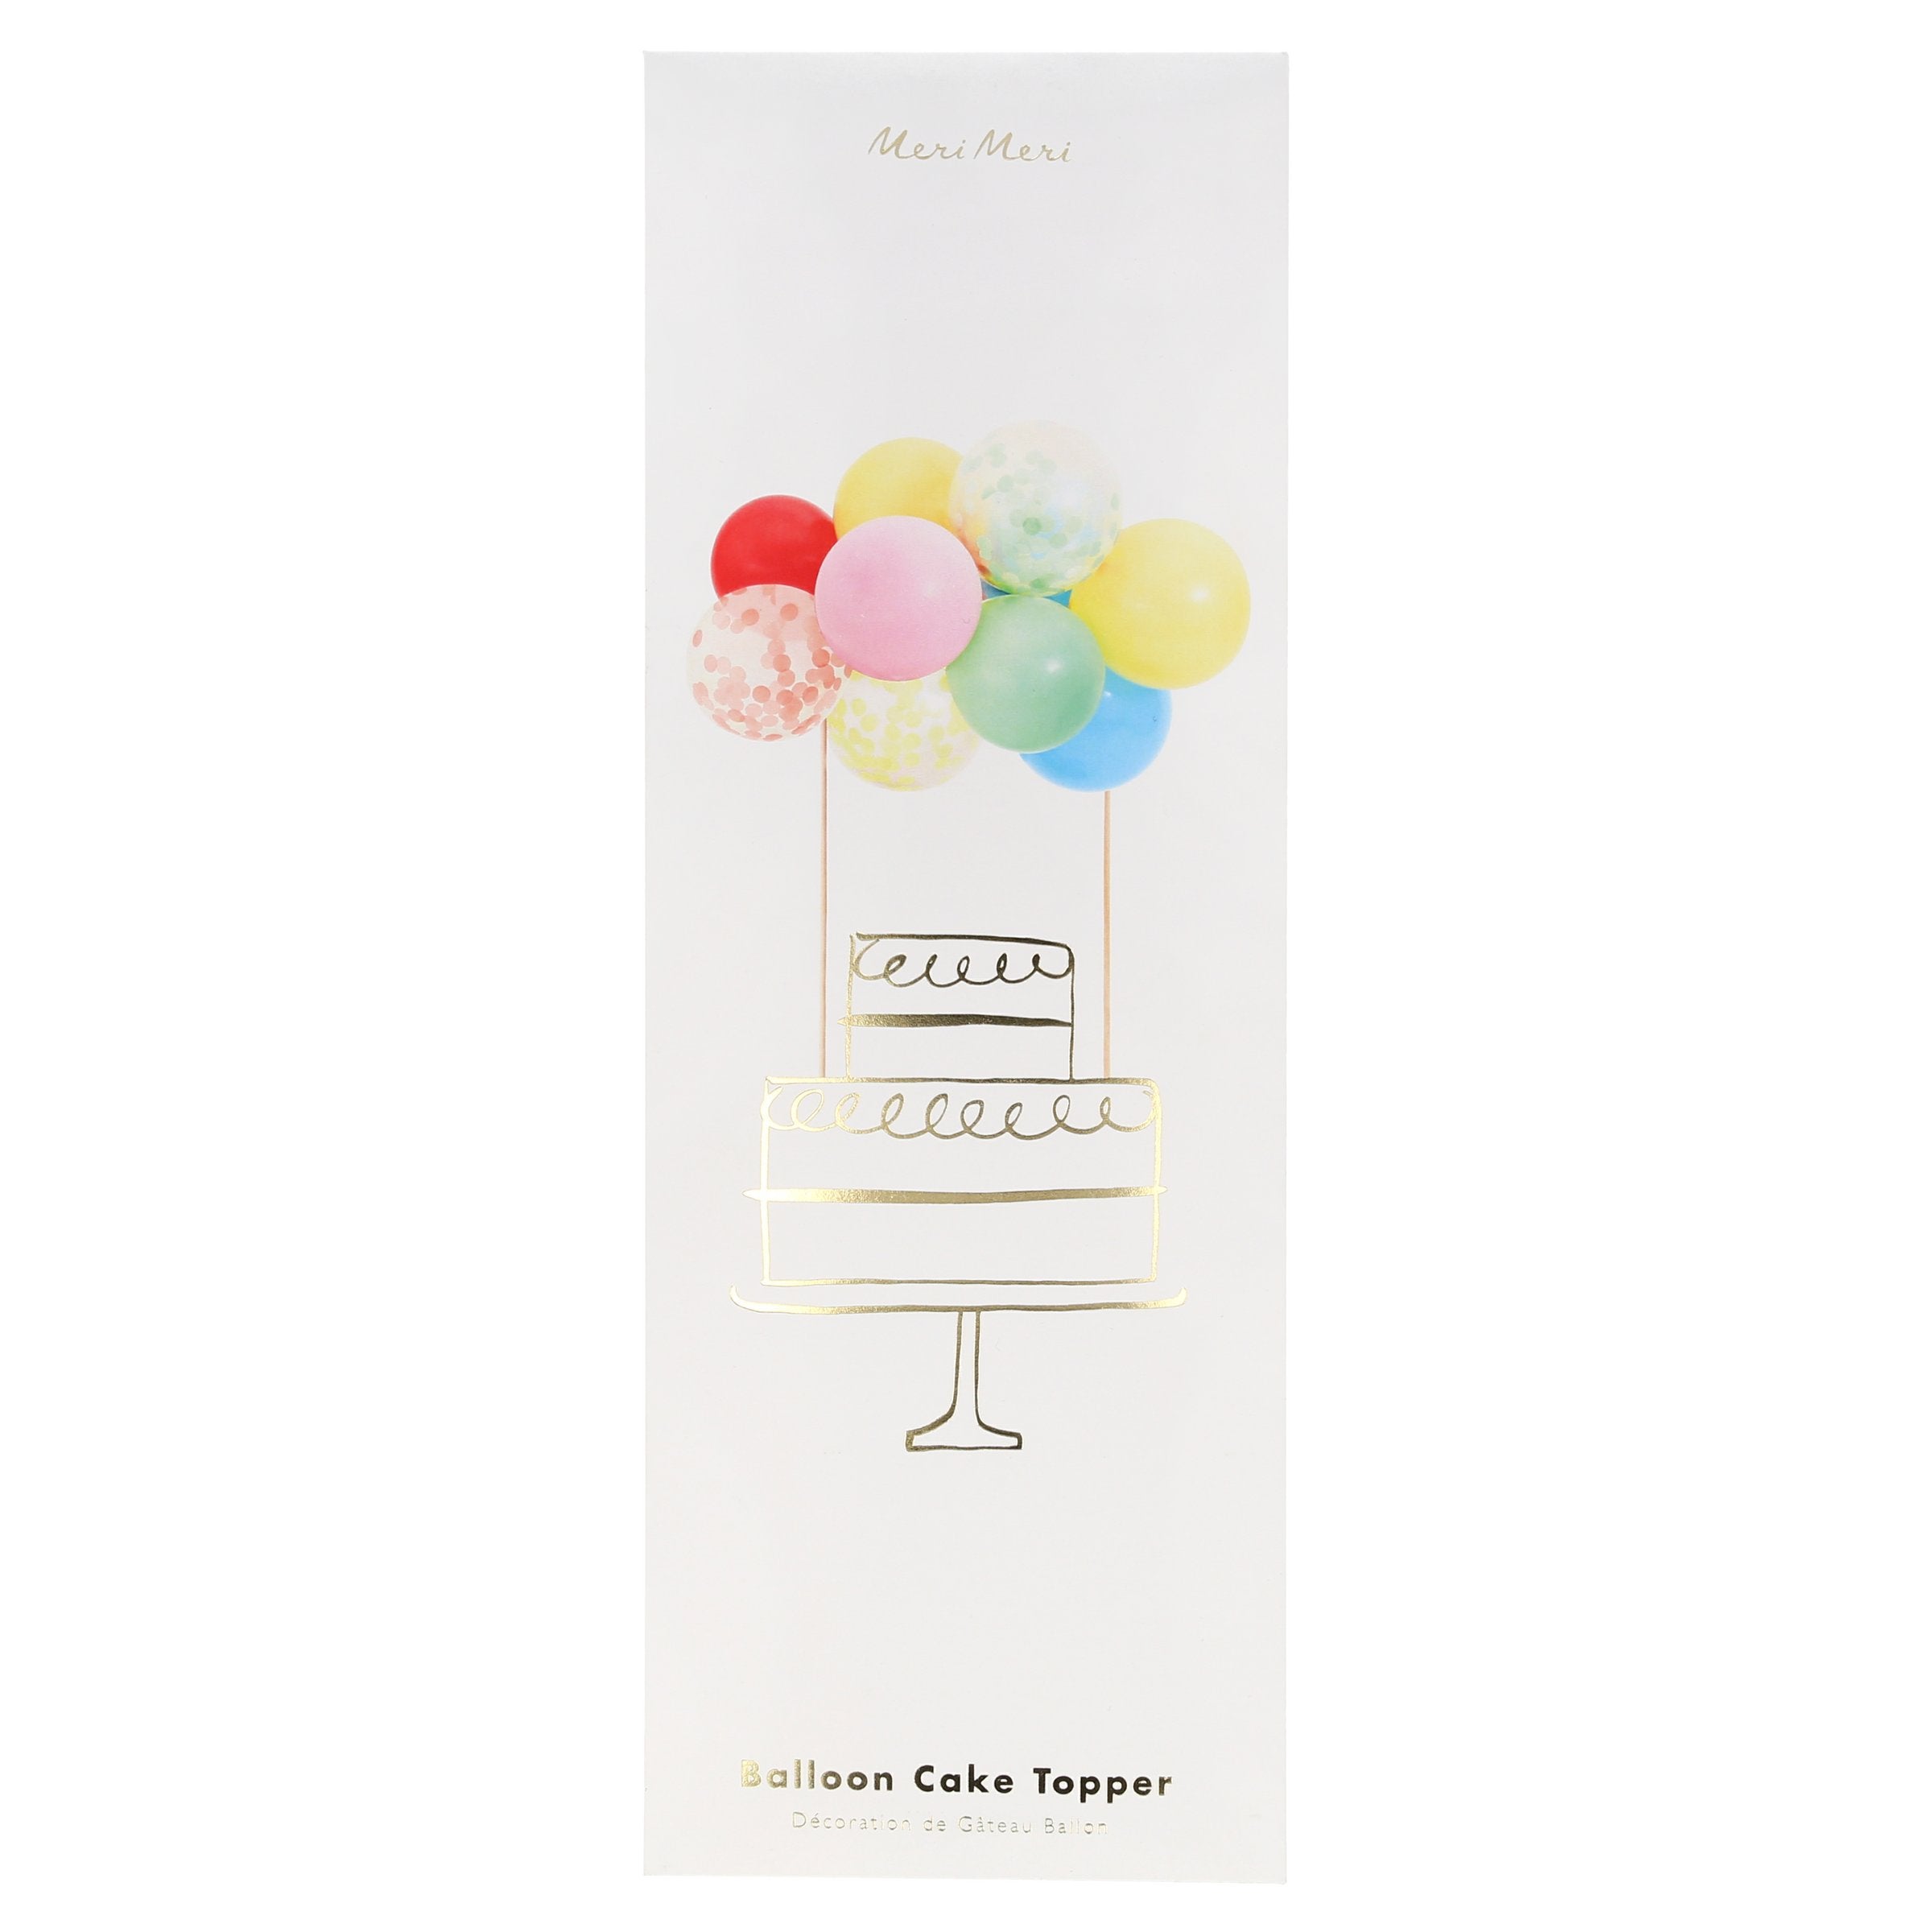 This cake topper kit includes bright balloons, confetti balloons, 2 wooden skewers, a balloon strip and an instruction sheet.